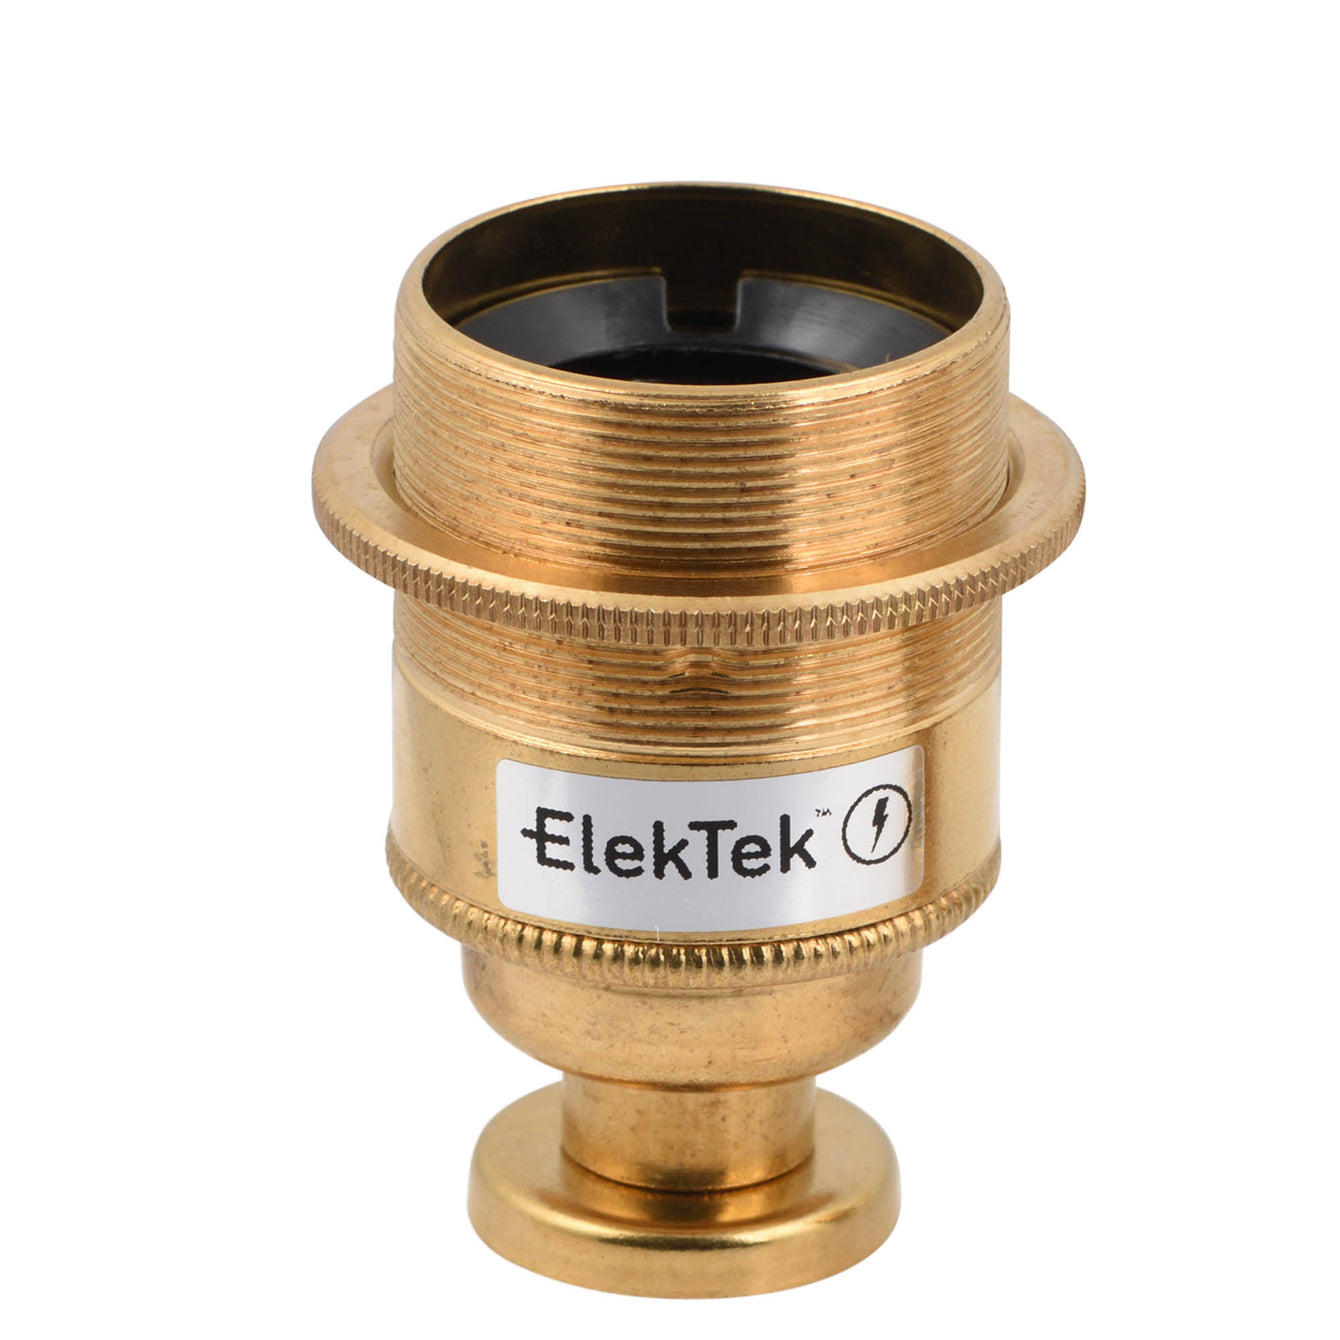 ElekTek ES Edison Screw E27 Lamp Holder Shade Ring With Back Plate Cover and Screws Brass and Matched Cover - Buy It Better Antique Brass